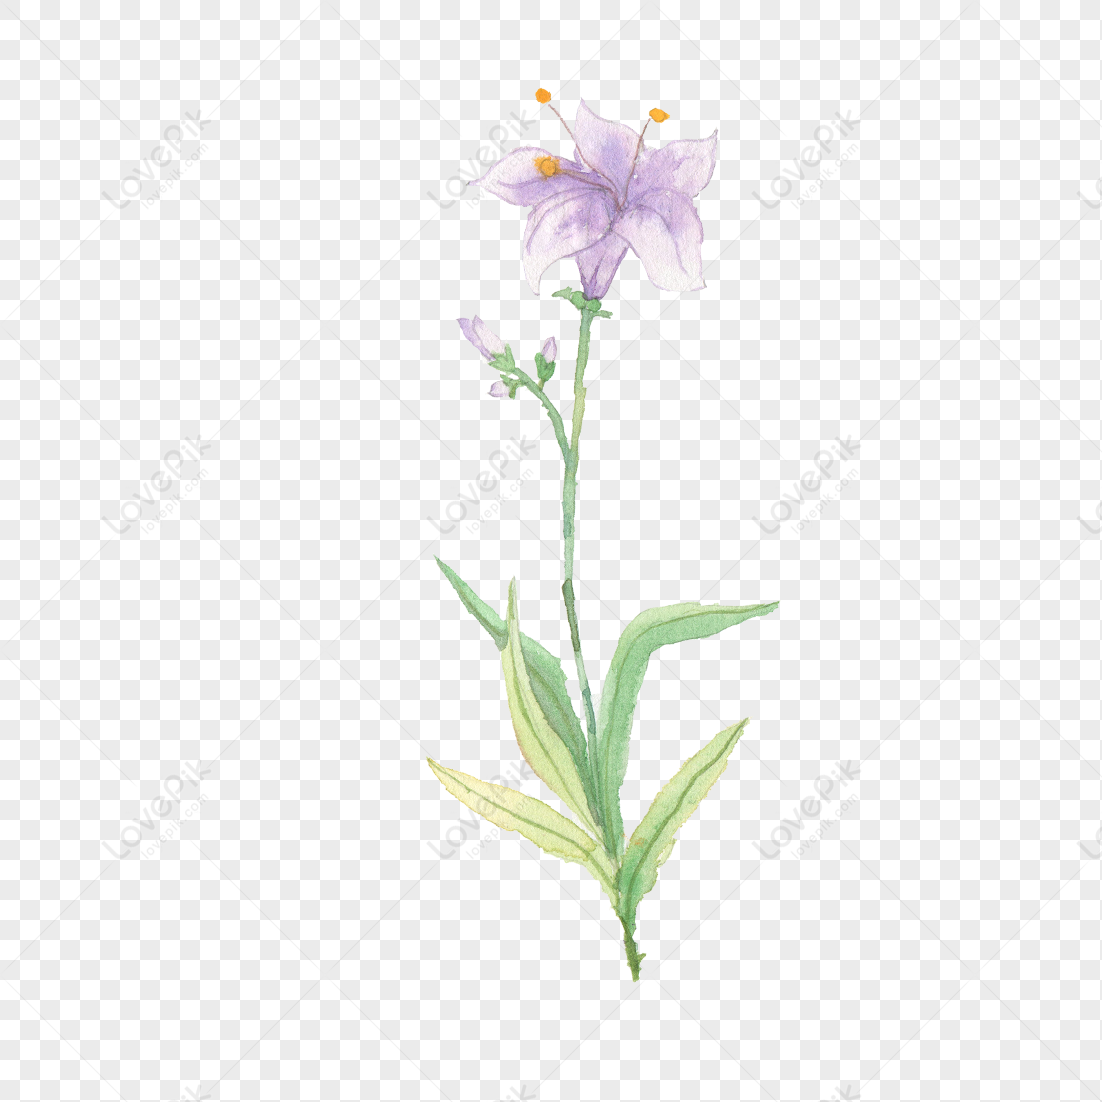 Freesia Flower PNG Images With Transparent Background